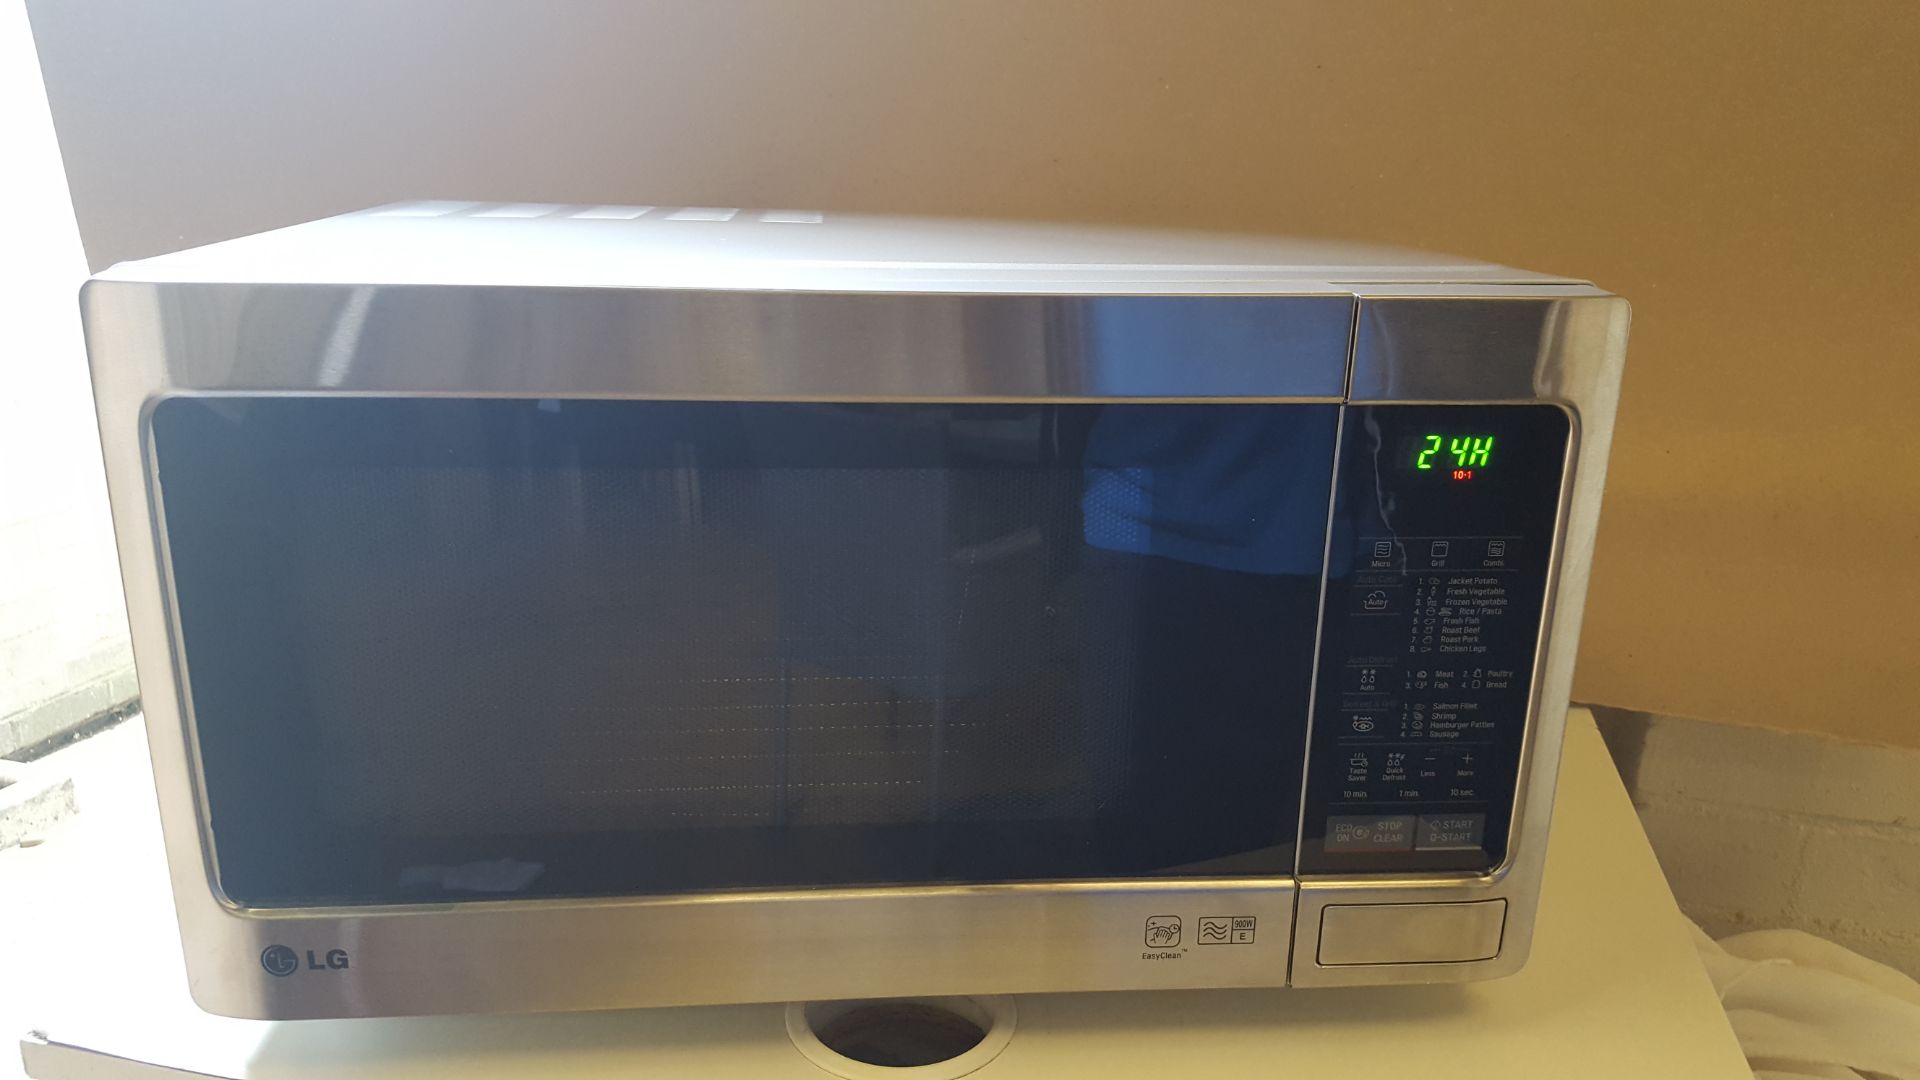 LG MH7042X Microwave Oven With Grill 28L - Image 2 of 4